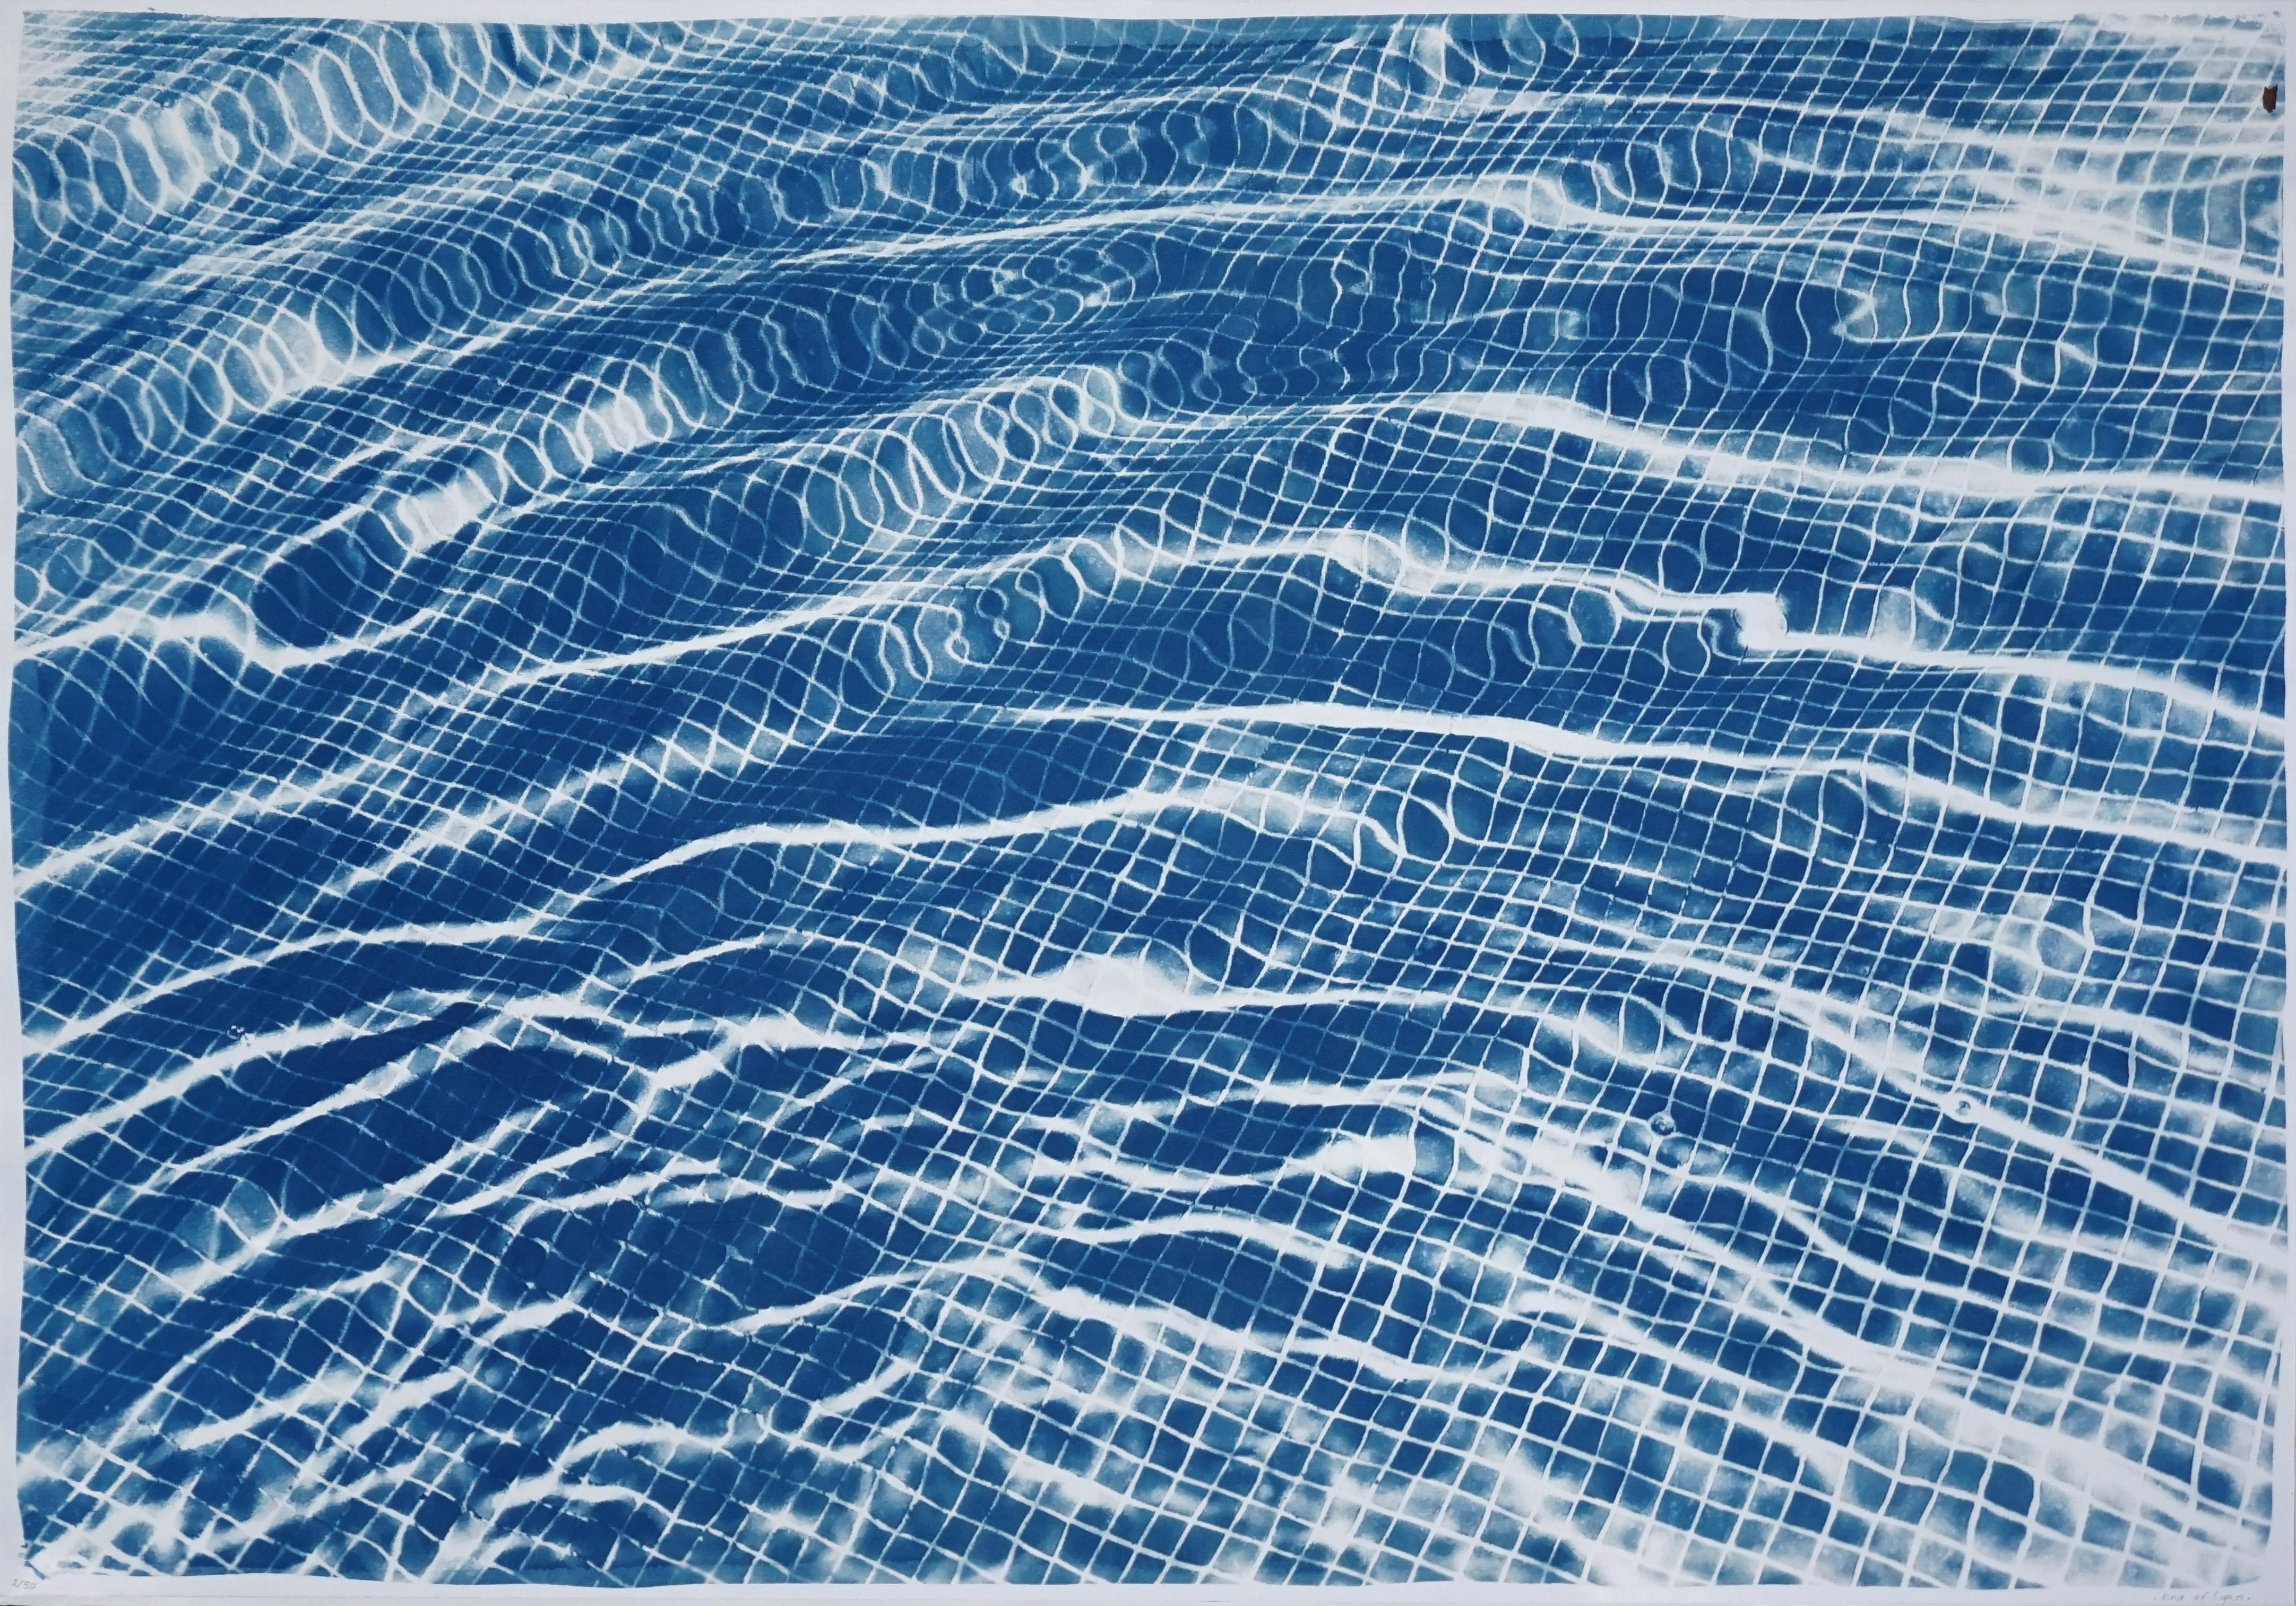 Kind of Cyan Landscape Print - "Miami Art Deco Pool" Cyanotype on Watercolor Paper, 100x70cm, Limited Edition 